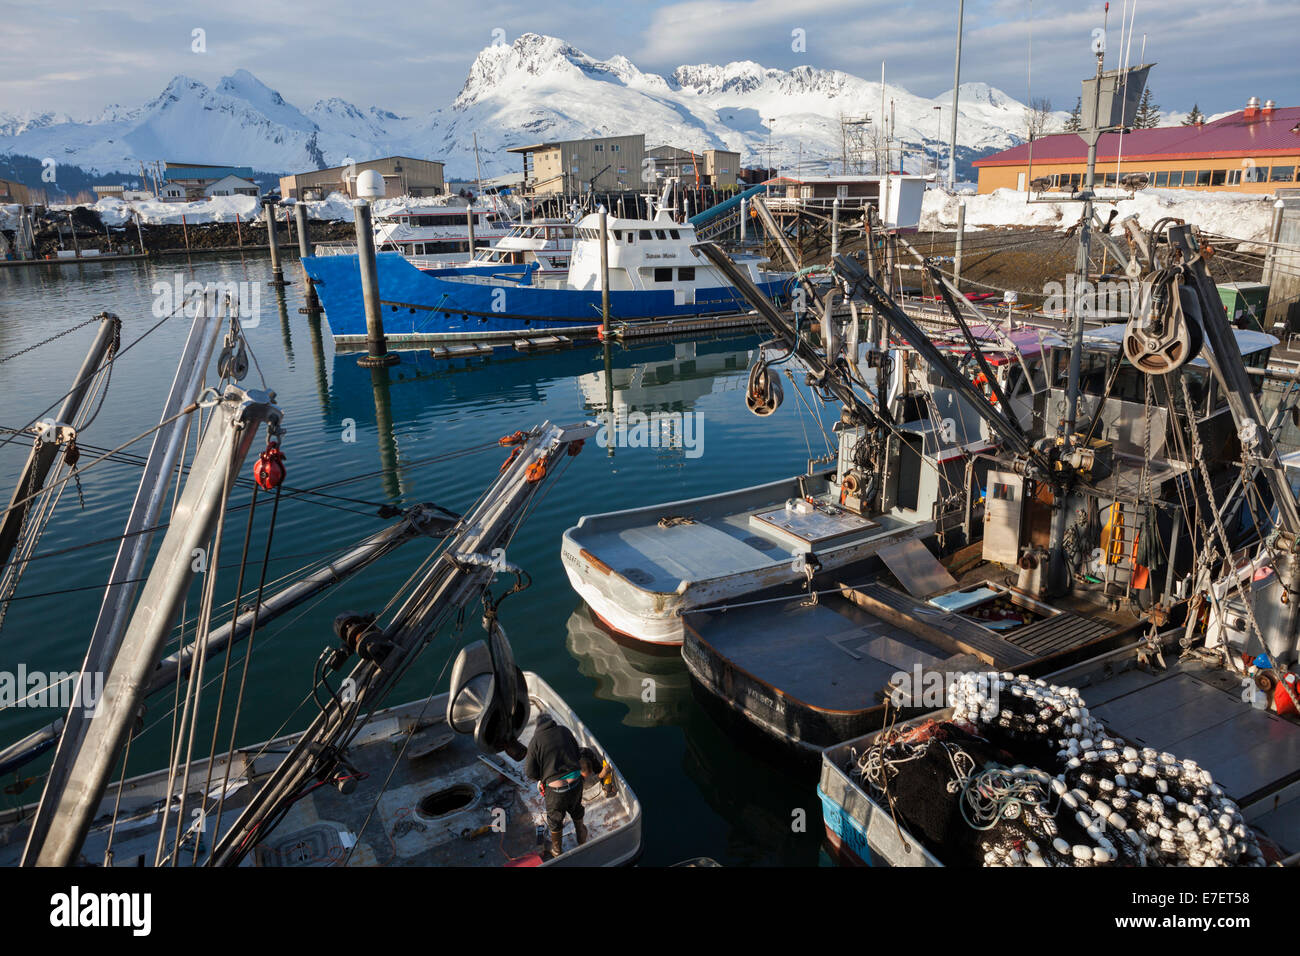 Fishing boats moored at the harbor in Valdez, Alaska. Peaks of the Chugach Mountains are visible across the fjord. Stock Photo